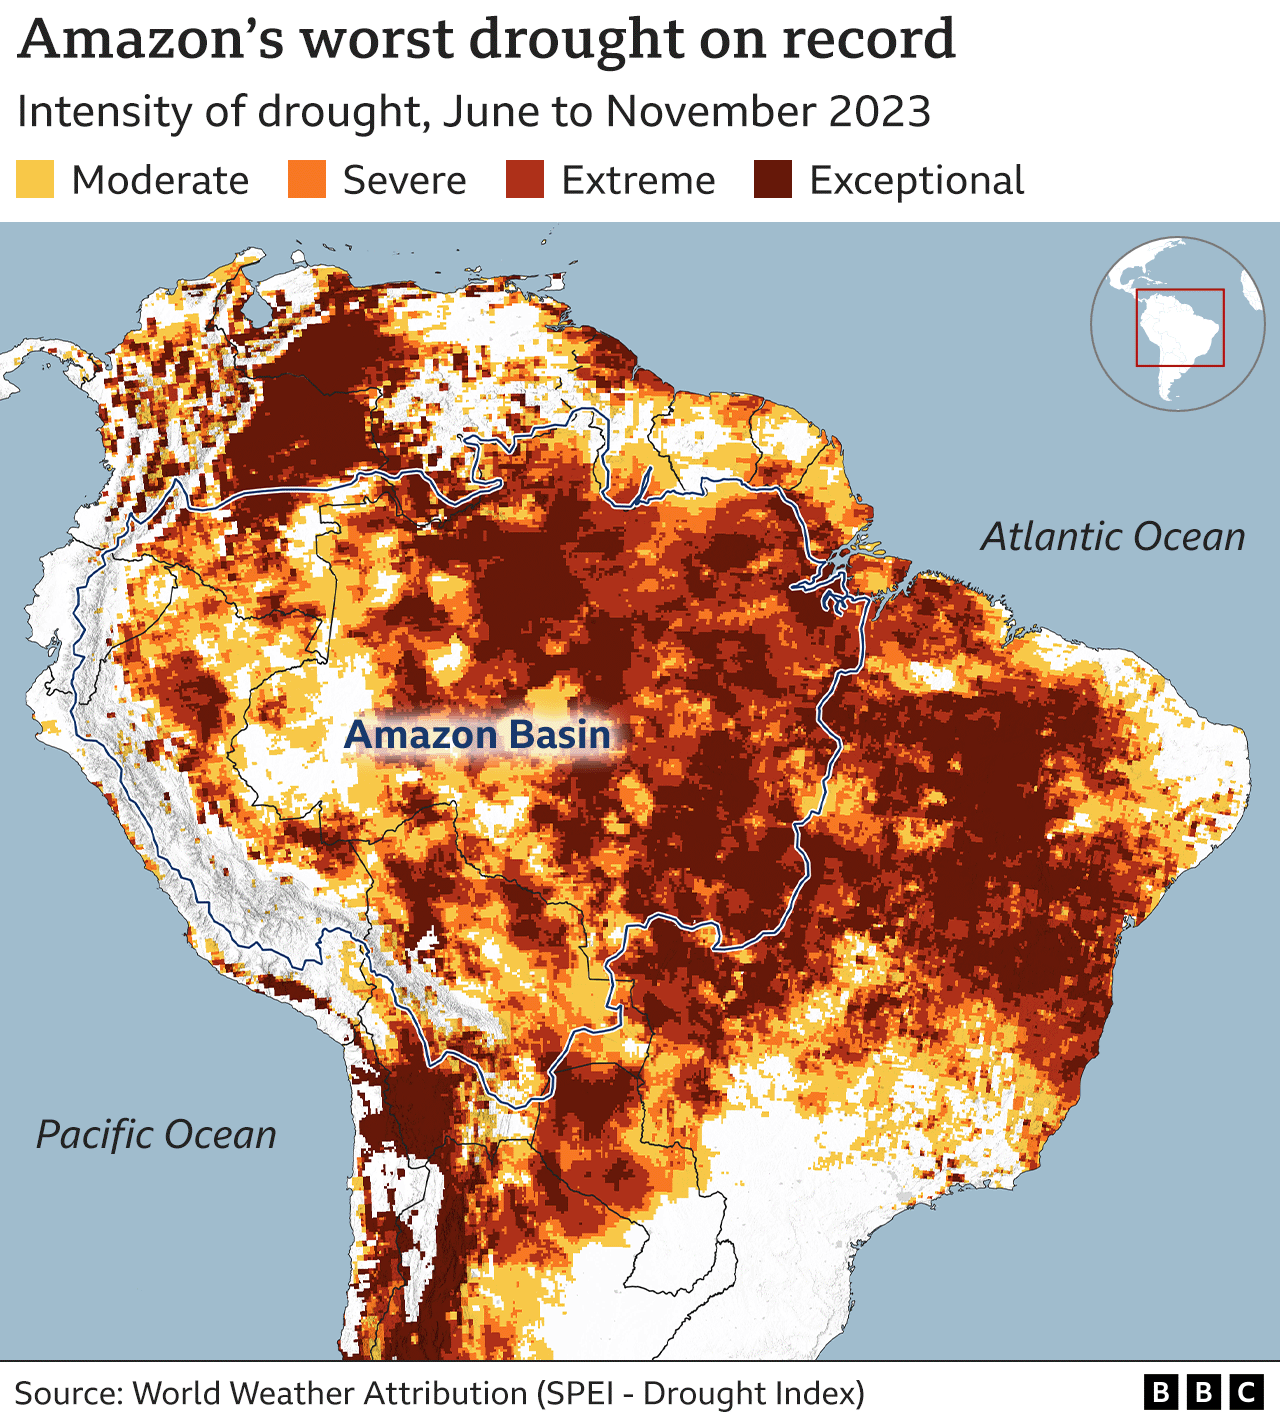 Map of drought intensity across South America. Much of the Amazon basin experienced the most intense levels of drought, marked in oranges and reds.